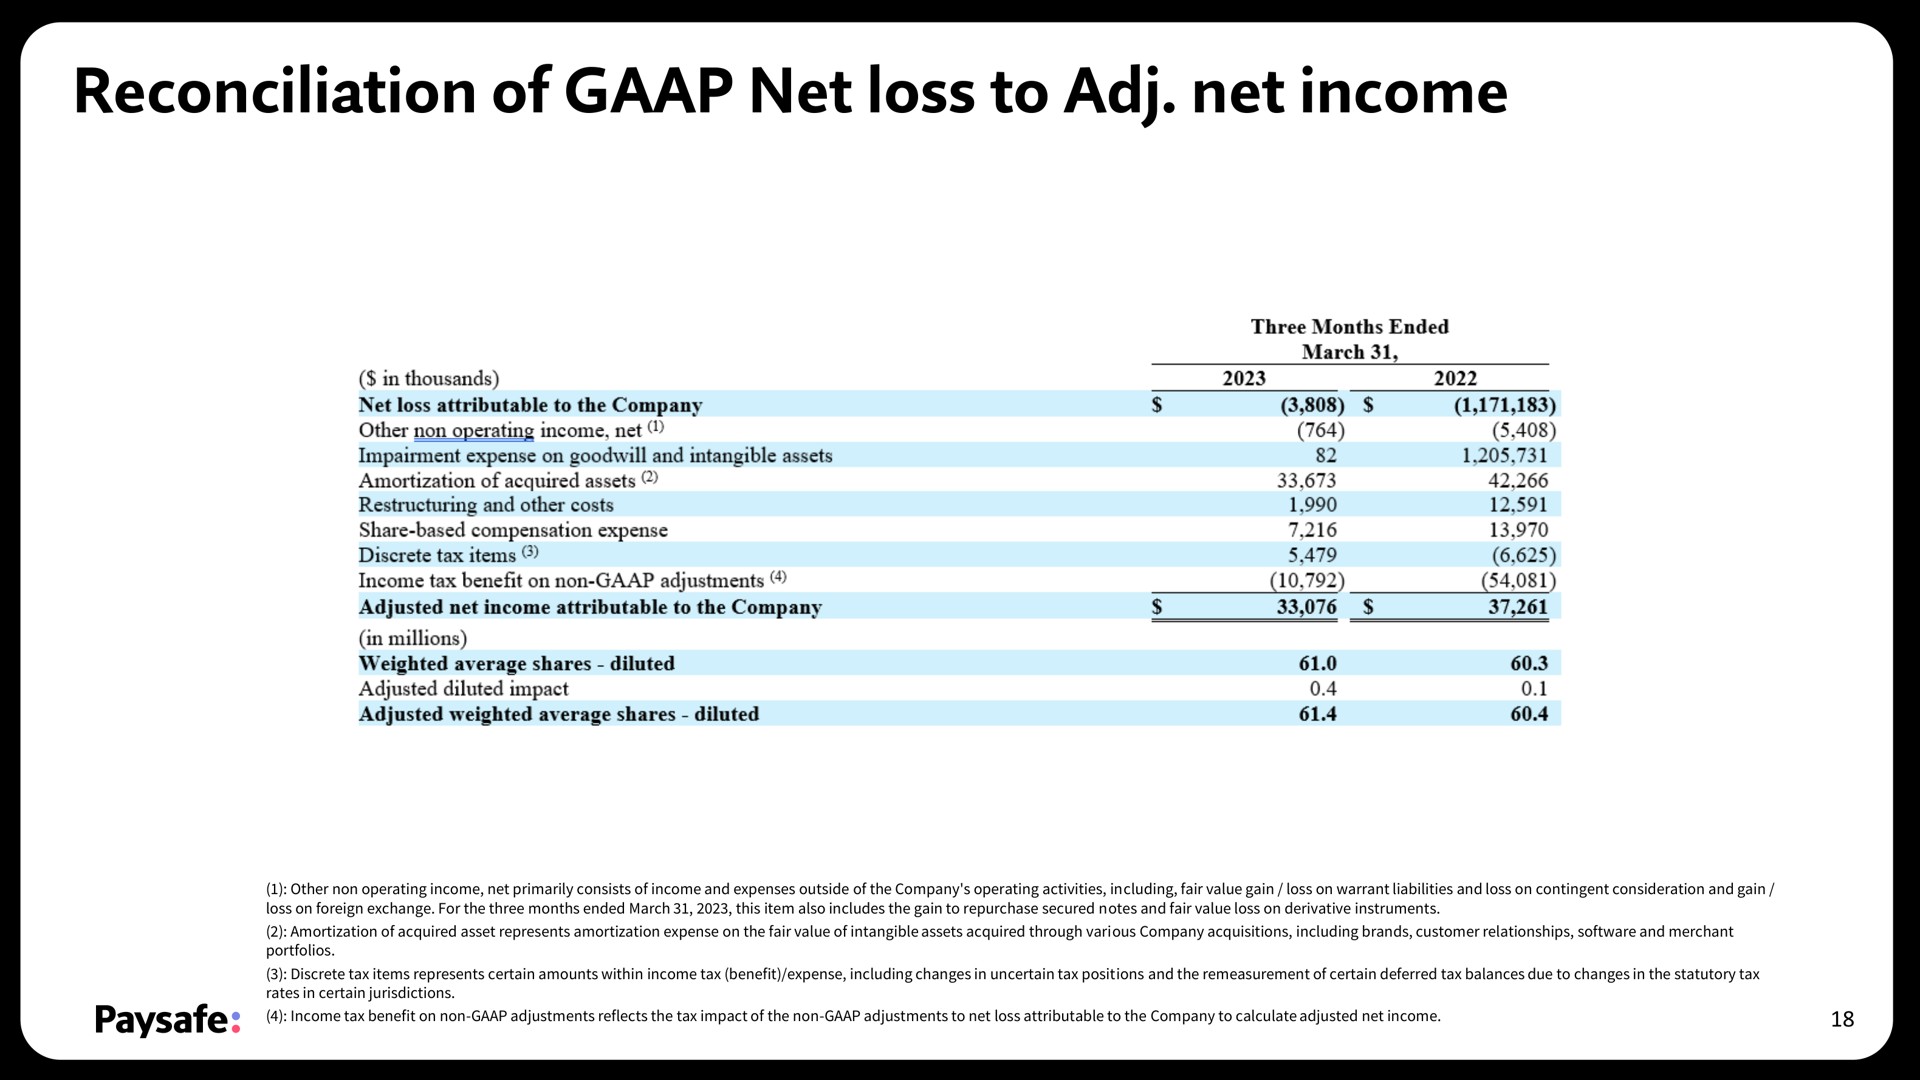 reconciliation of net loss to net income | Paysafe